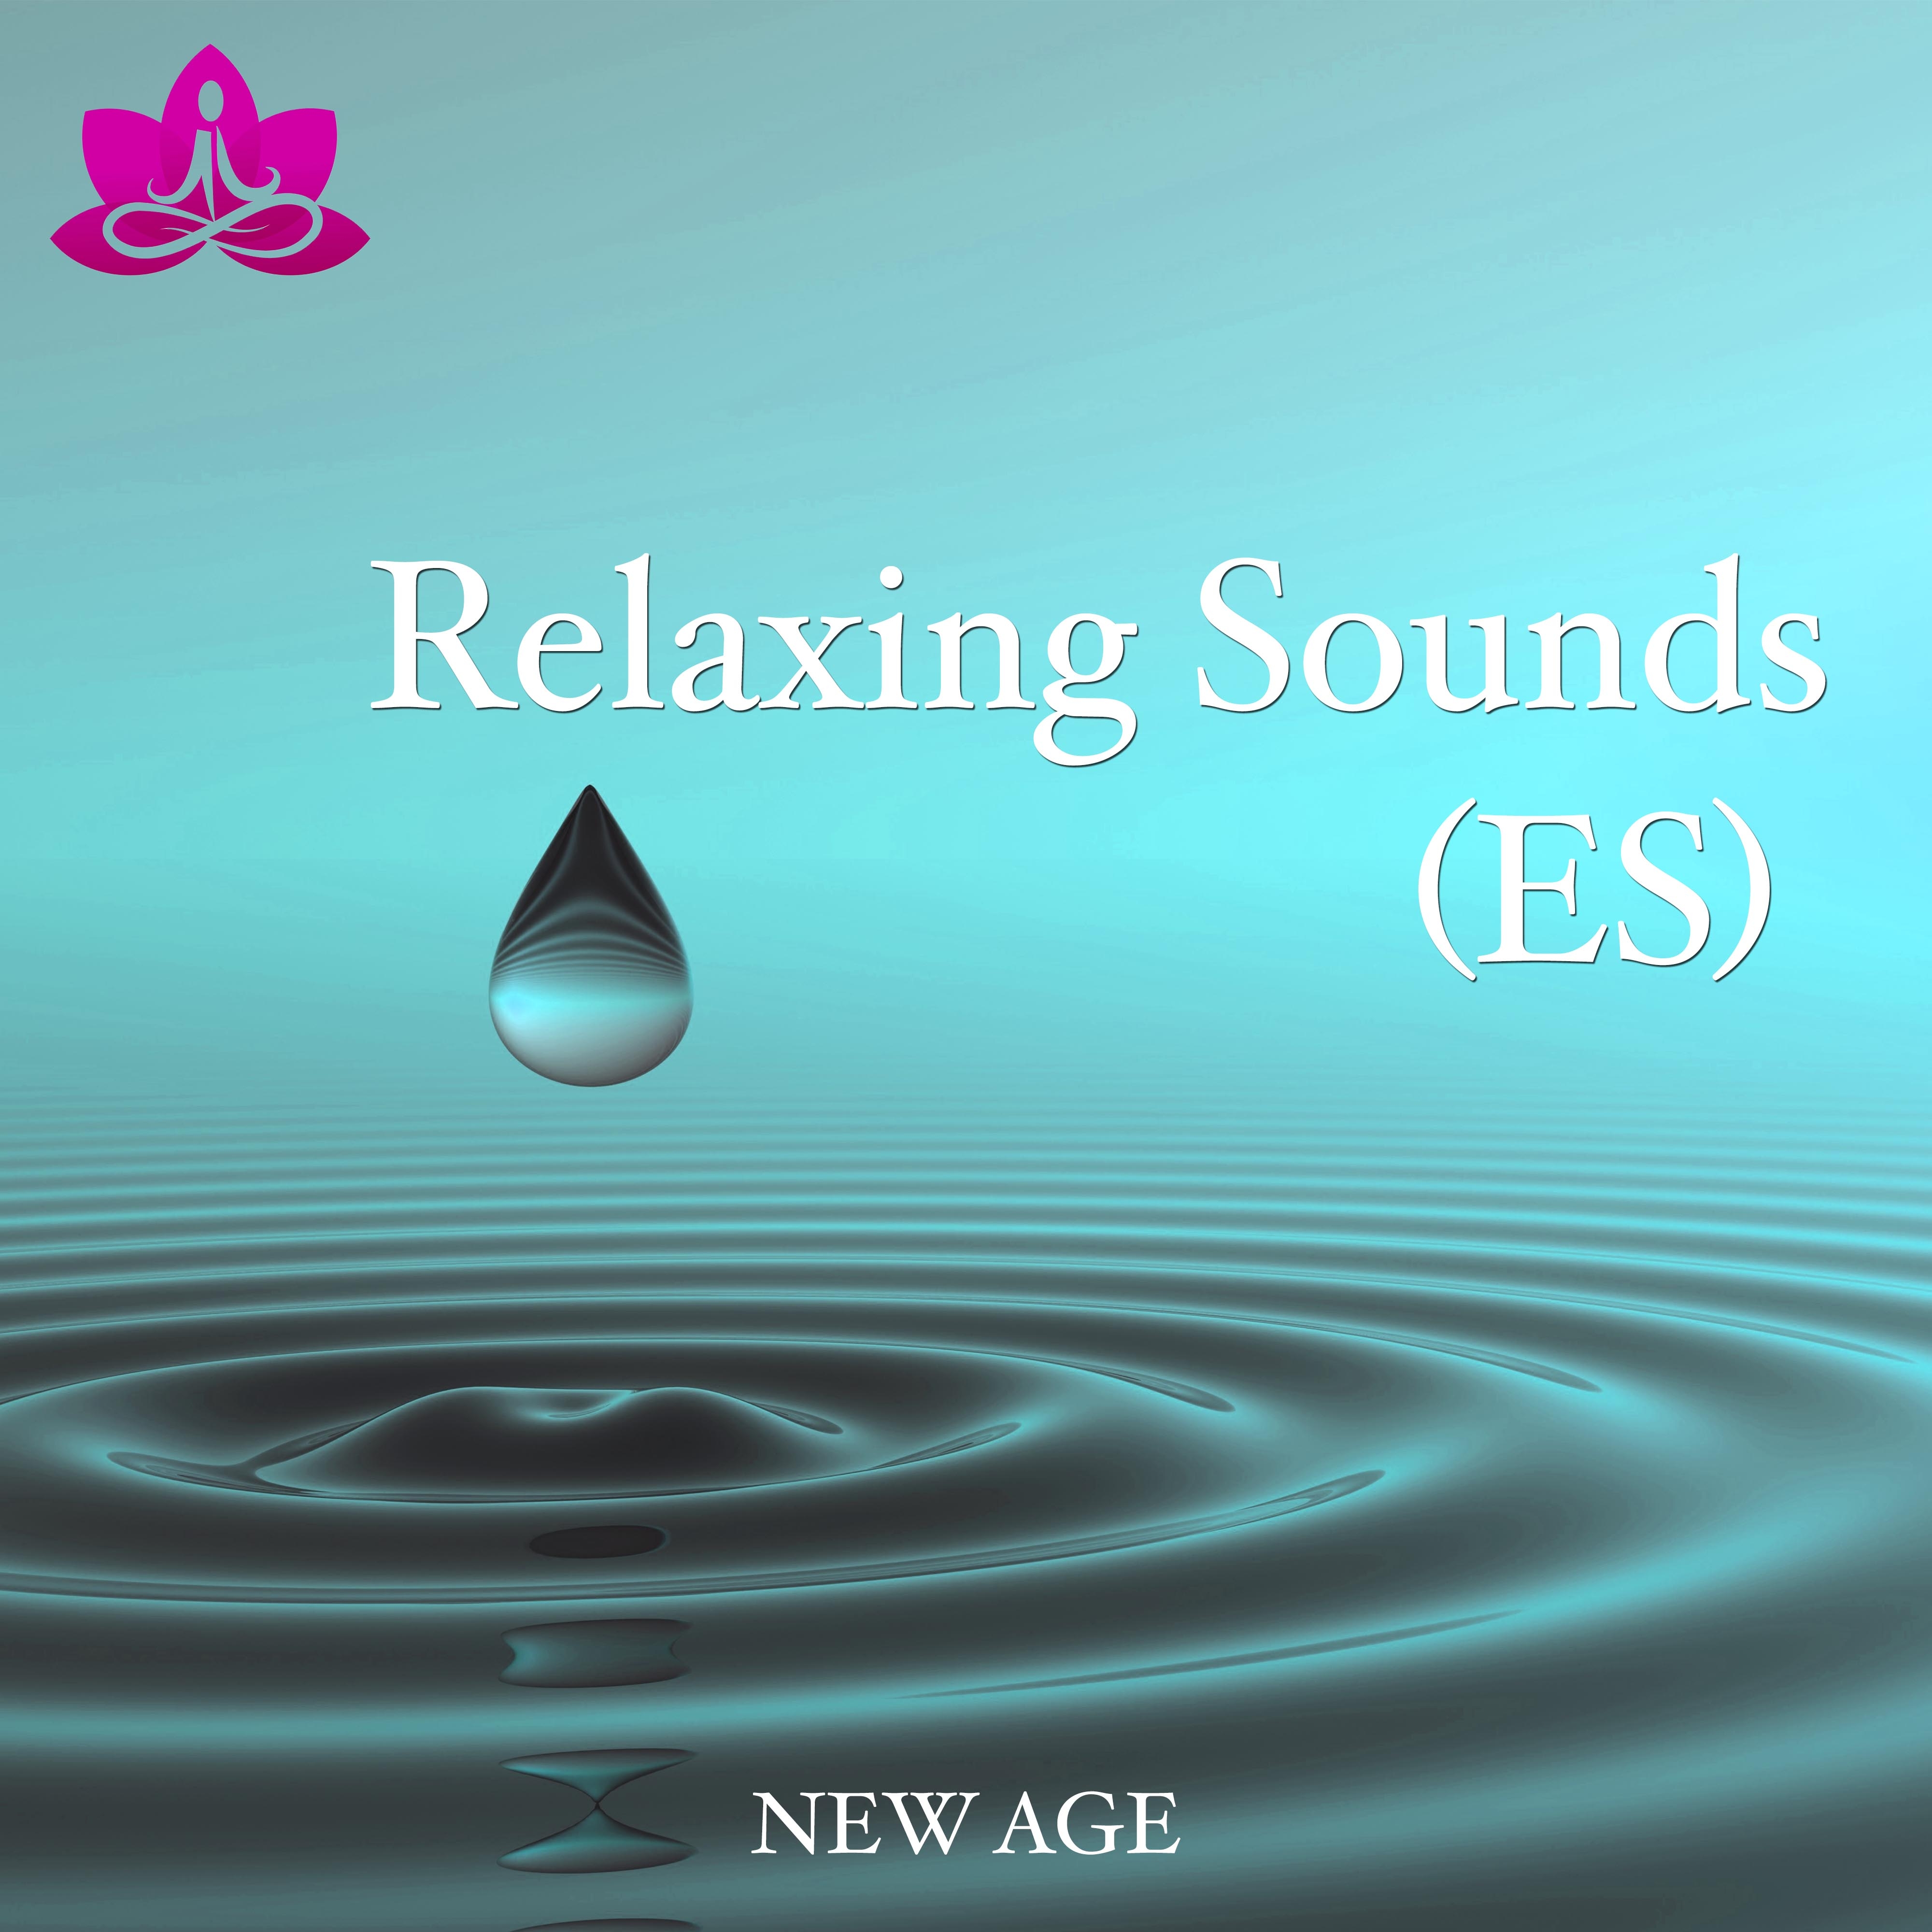 Relaxing Sounds (ES) - A Collection of the Most Beautiful Calming Sounds including Ocean Waves, Rain and Tibetan Singing Bowls